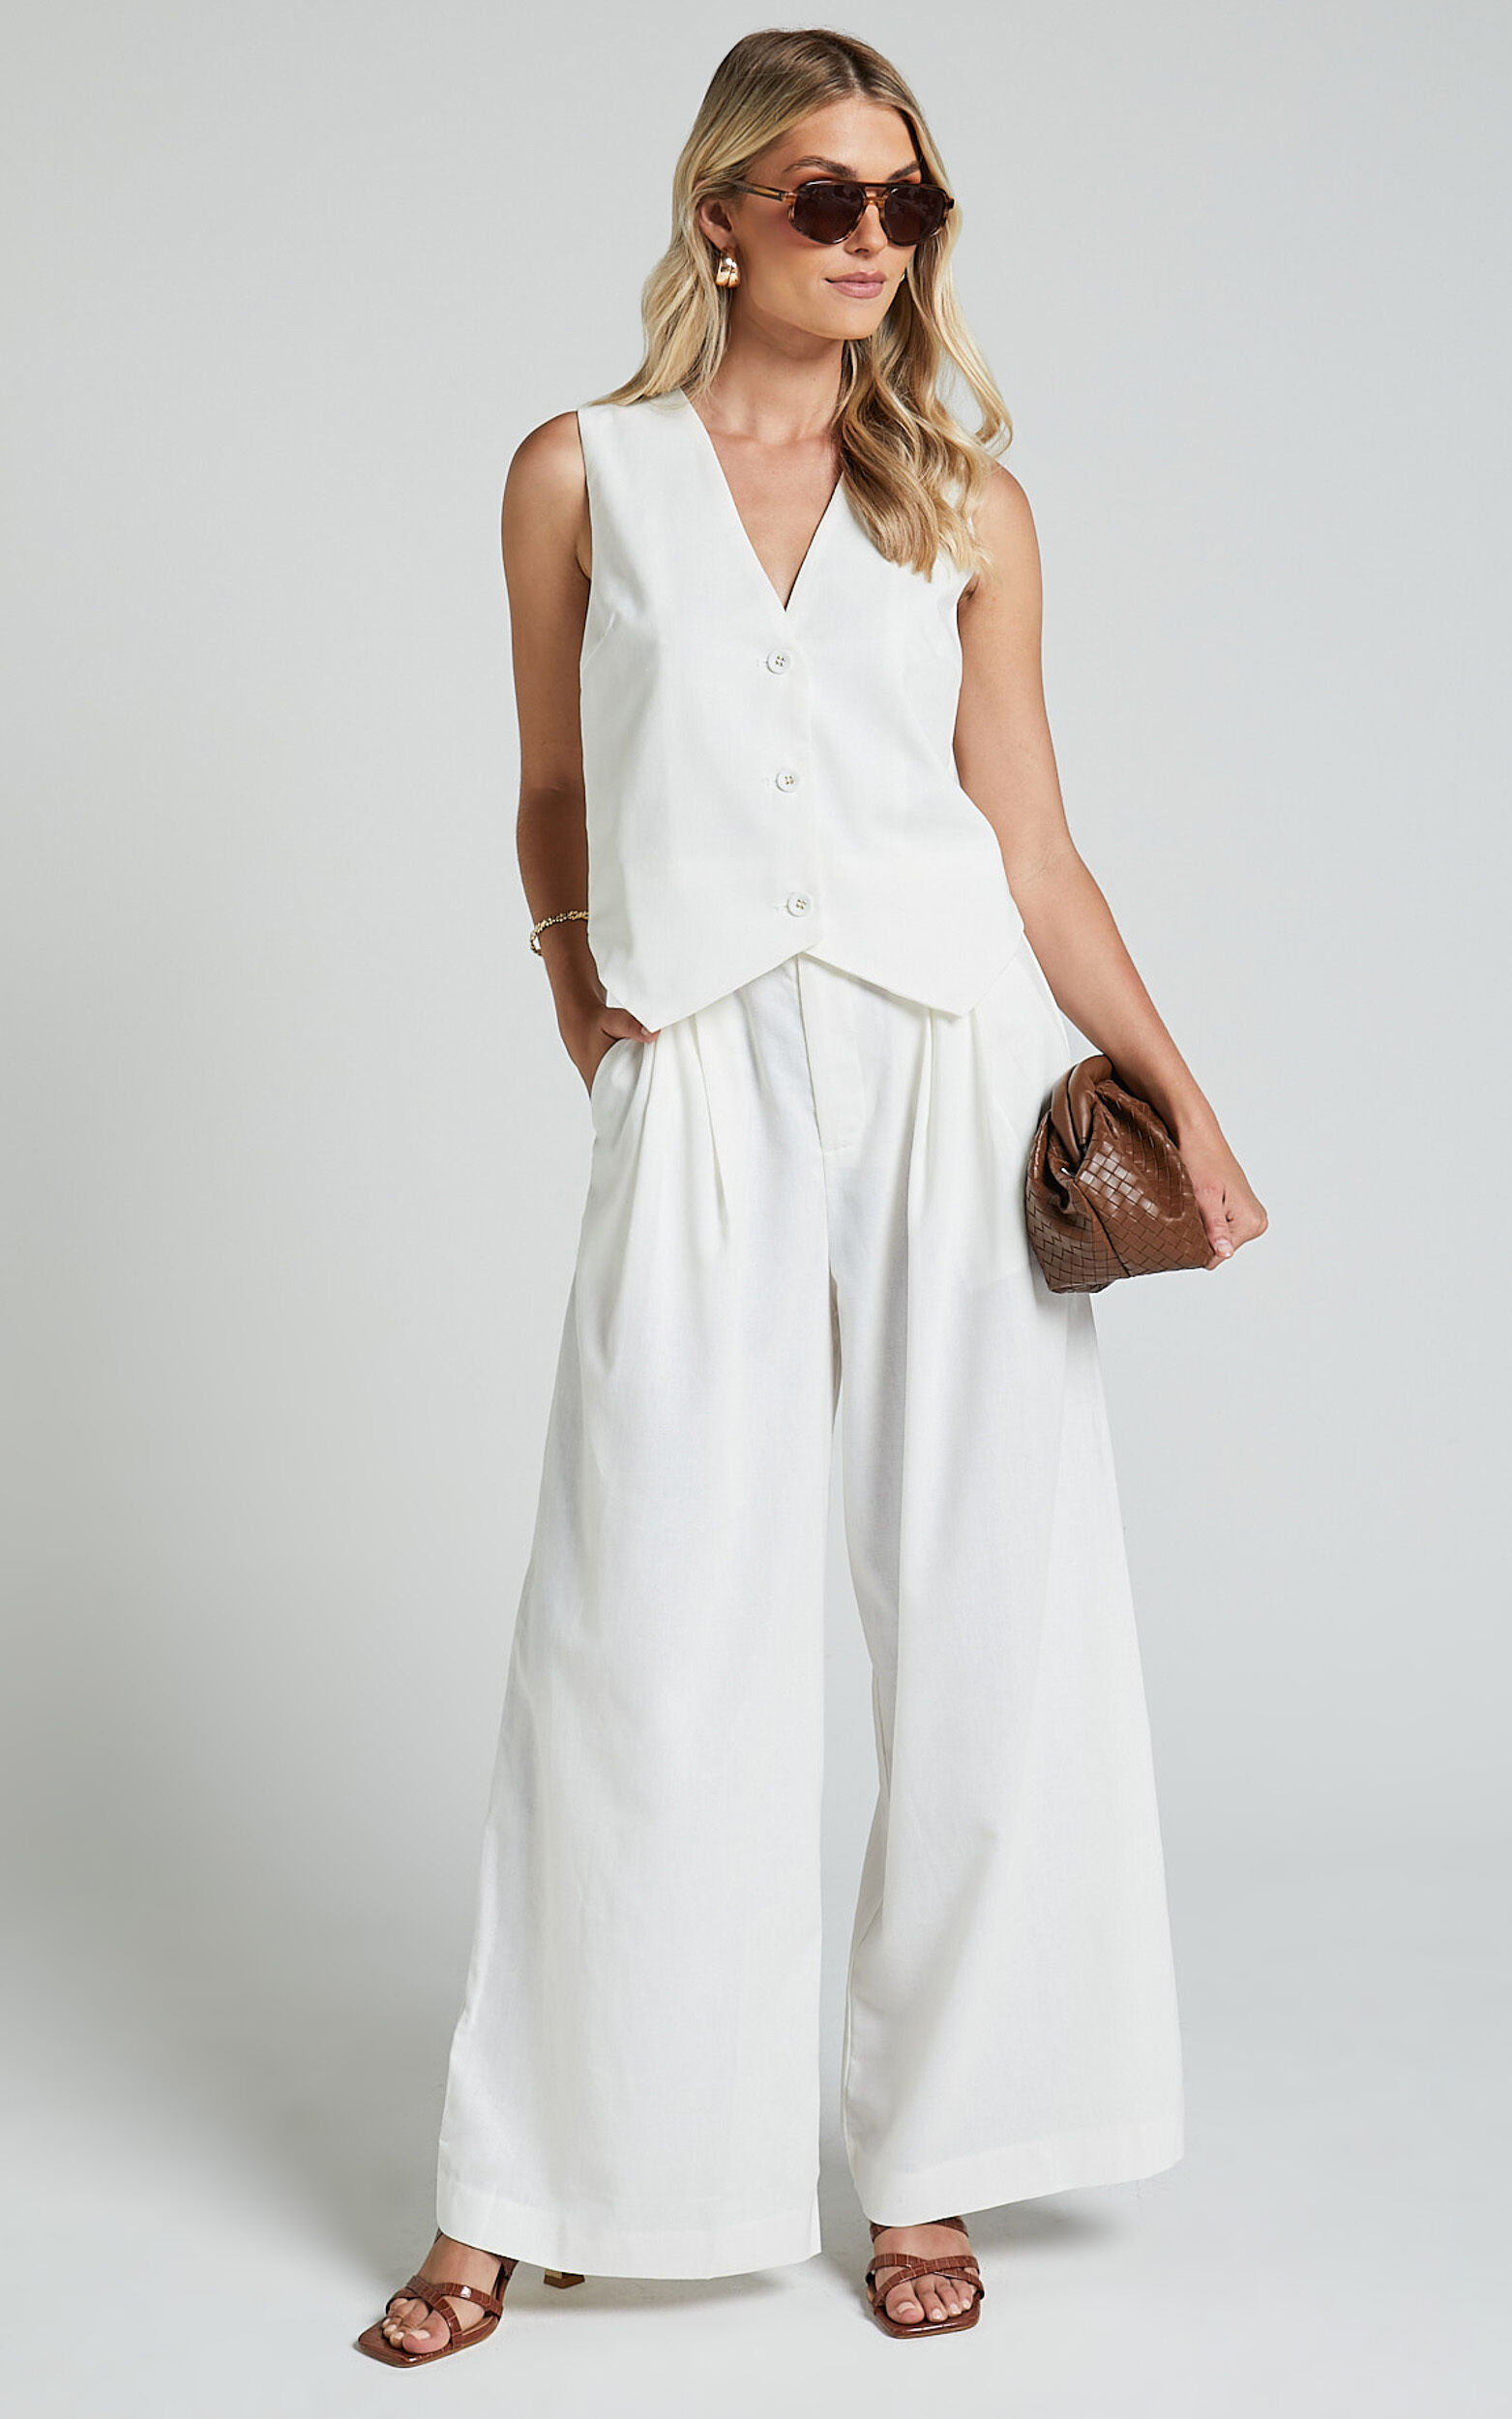 Lyssa Pants - Linen Look High Waisted Front Pleat Wide Leg Pants in Off White - 06, WHT1